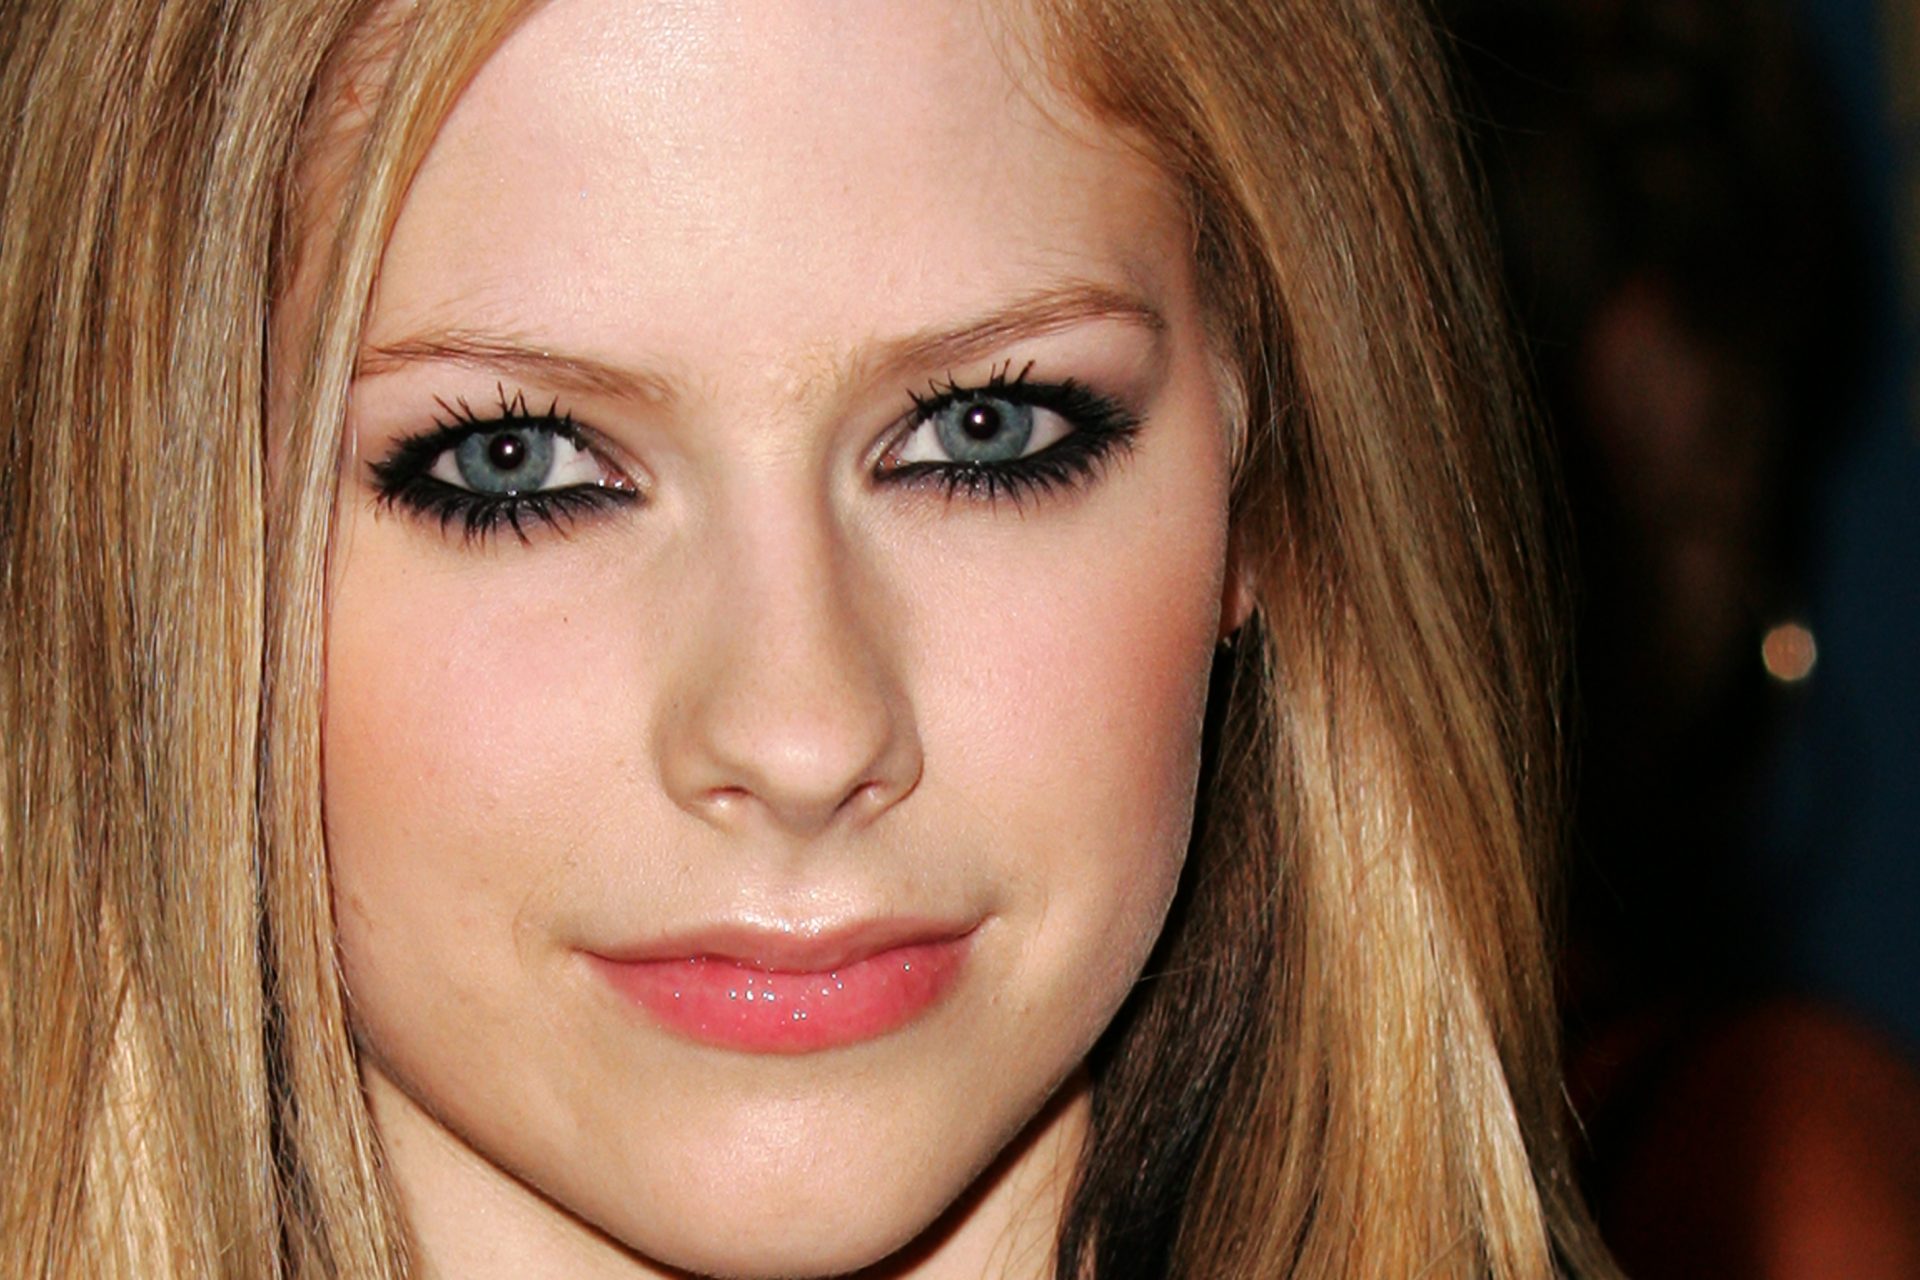 The absurd conspiracy theory about Avril Lavigne